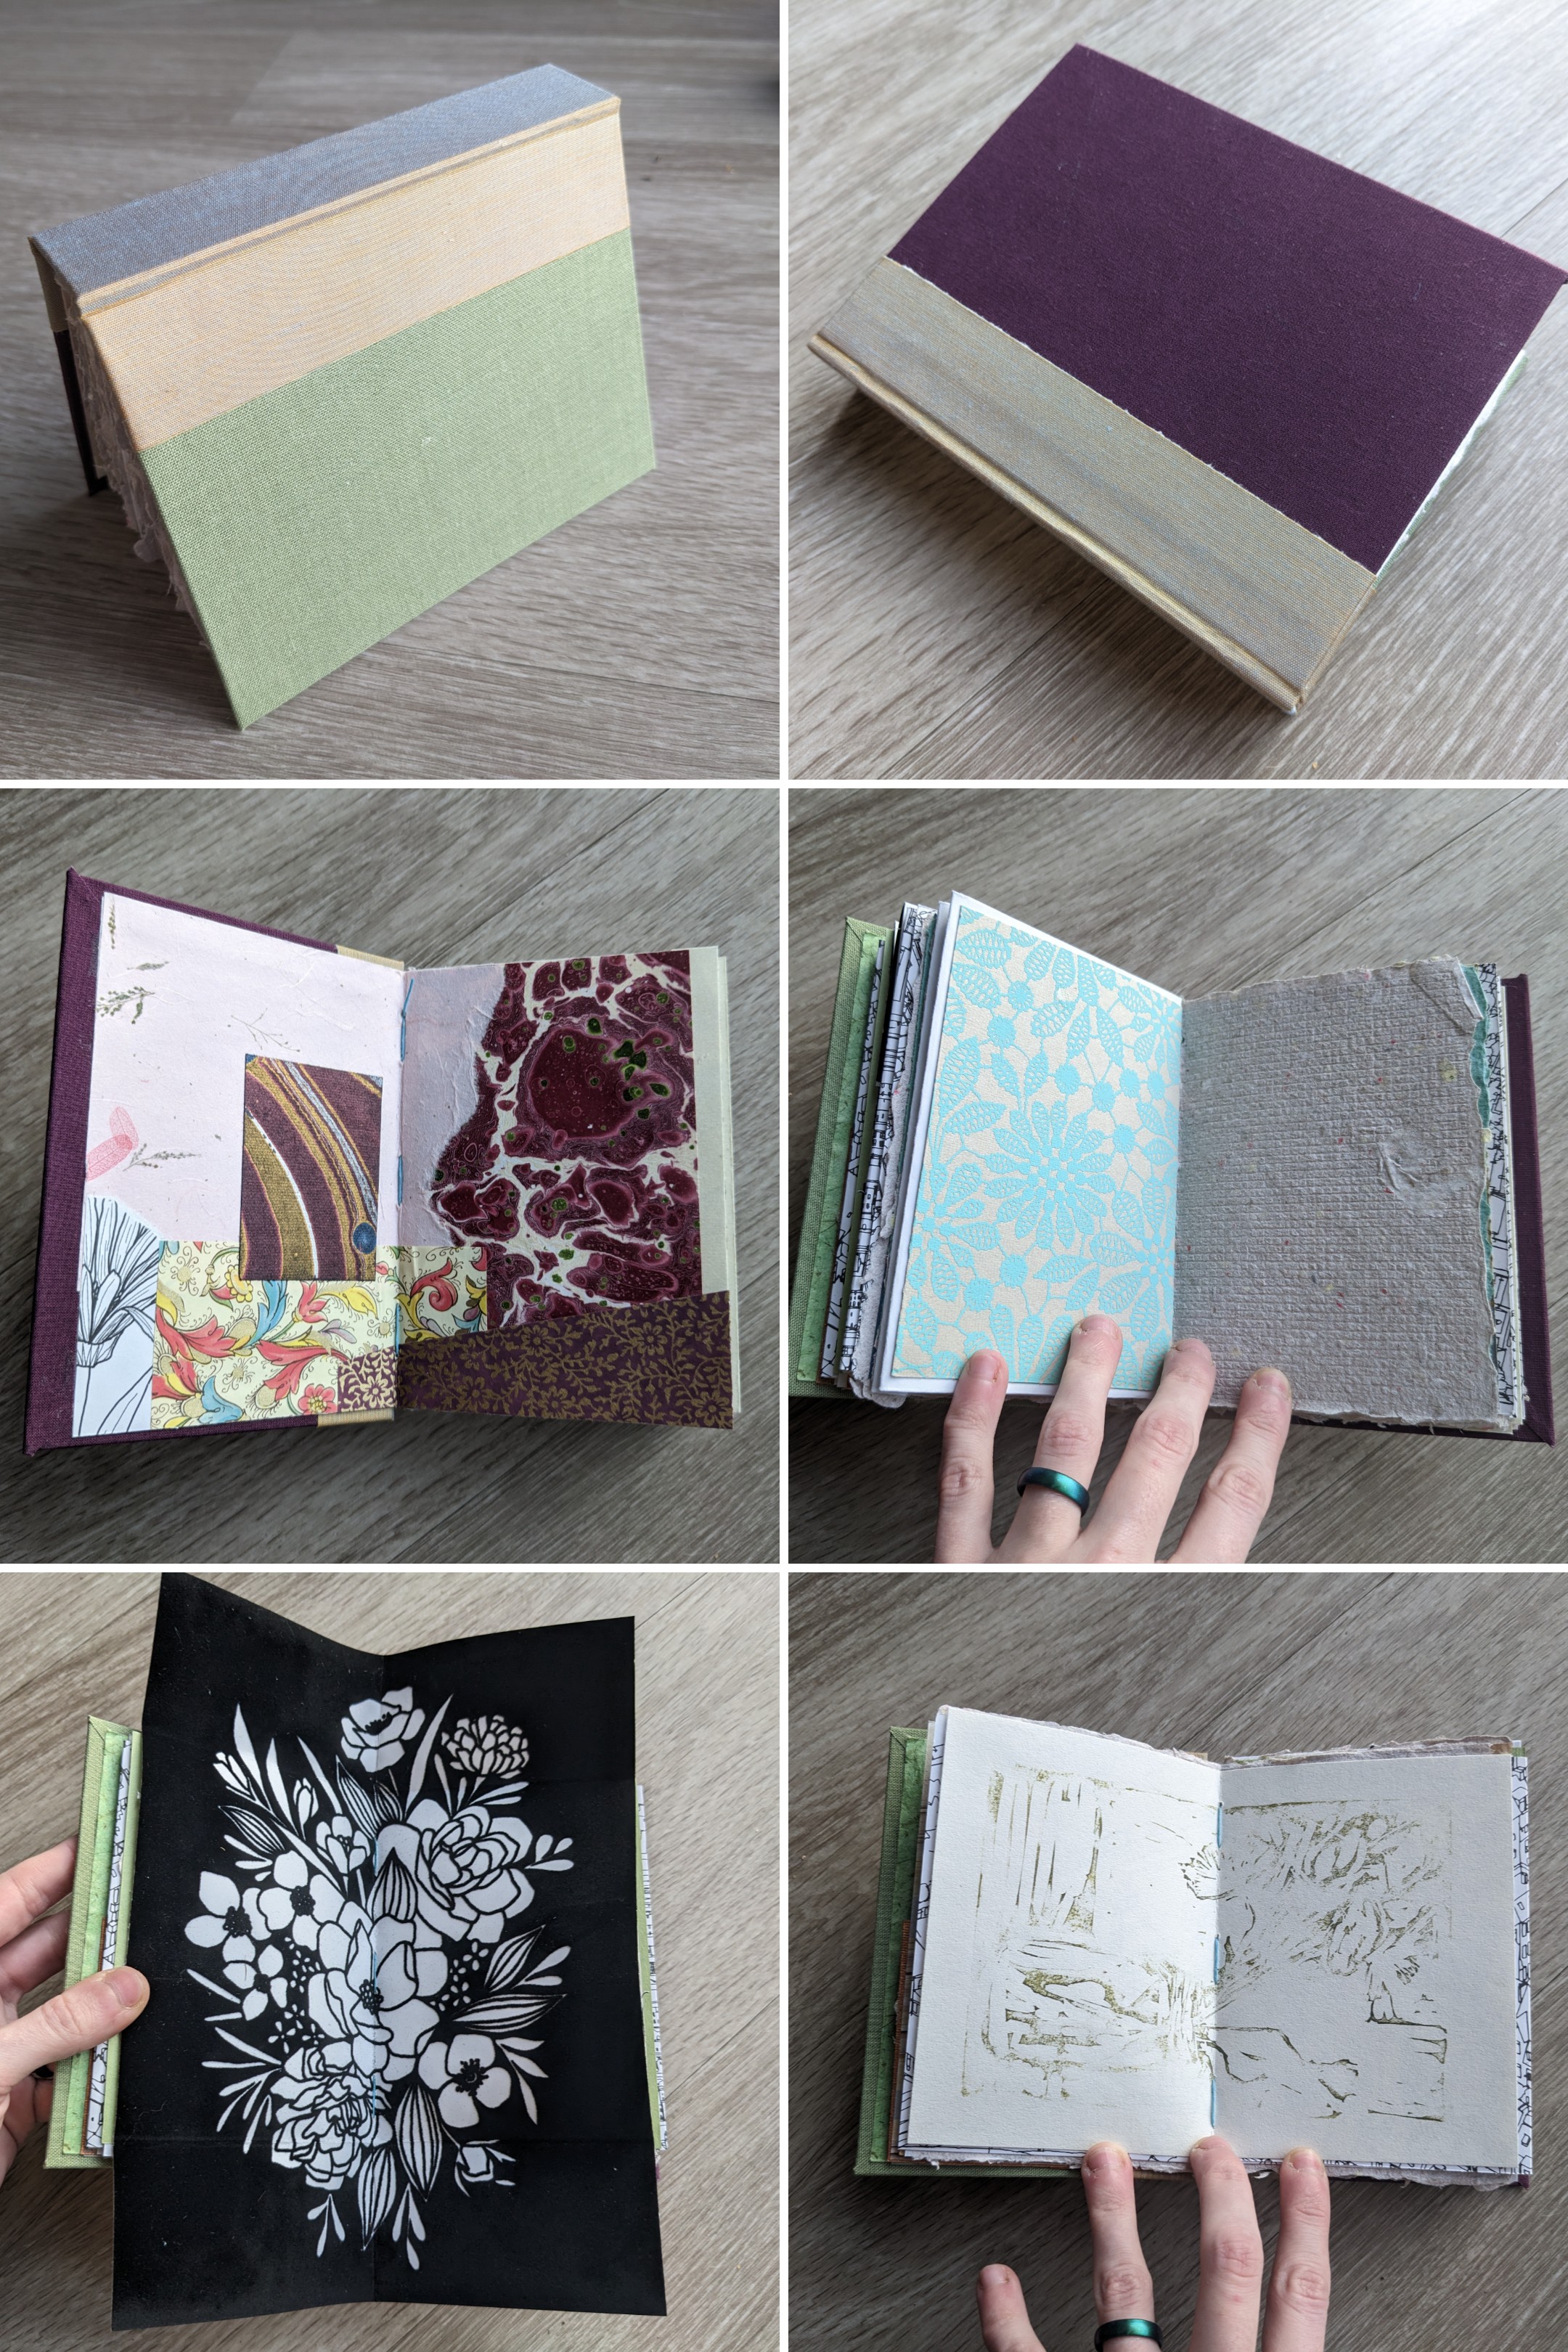 A six panel collage showing the covers, endpapers, and some of the pages of a notebook.